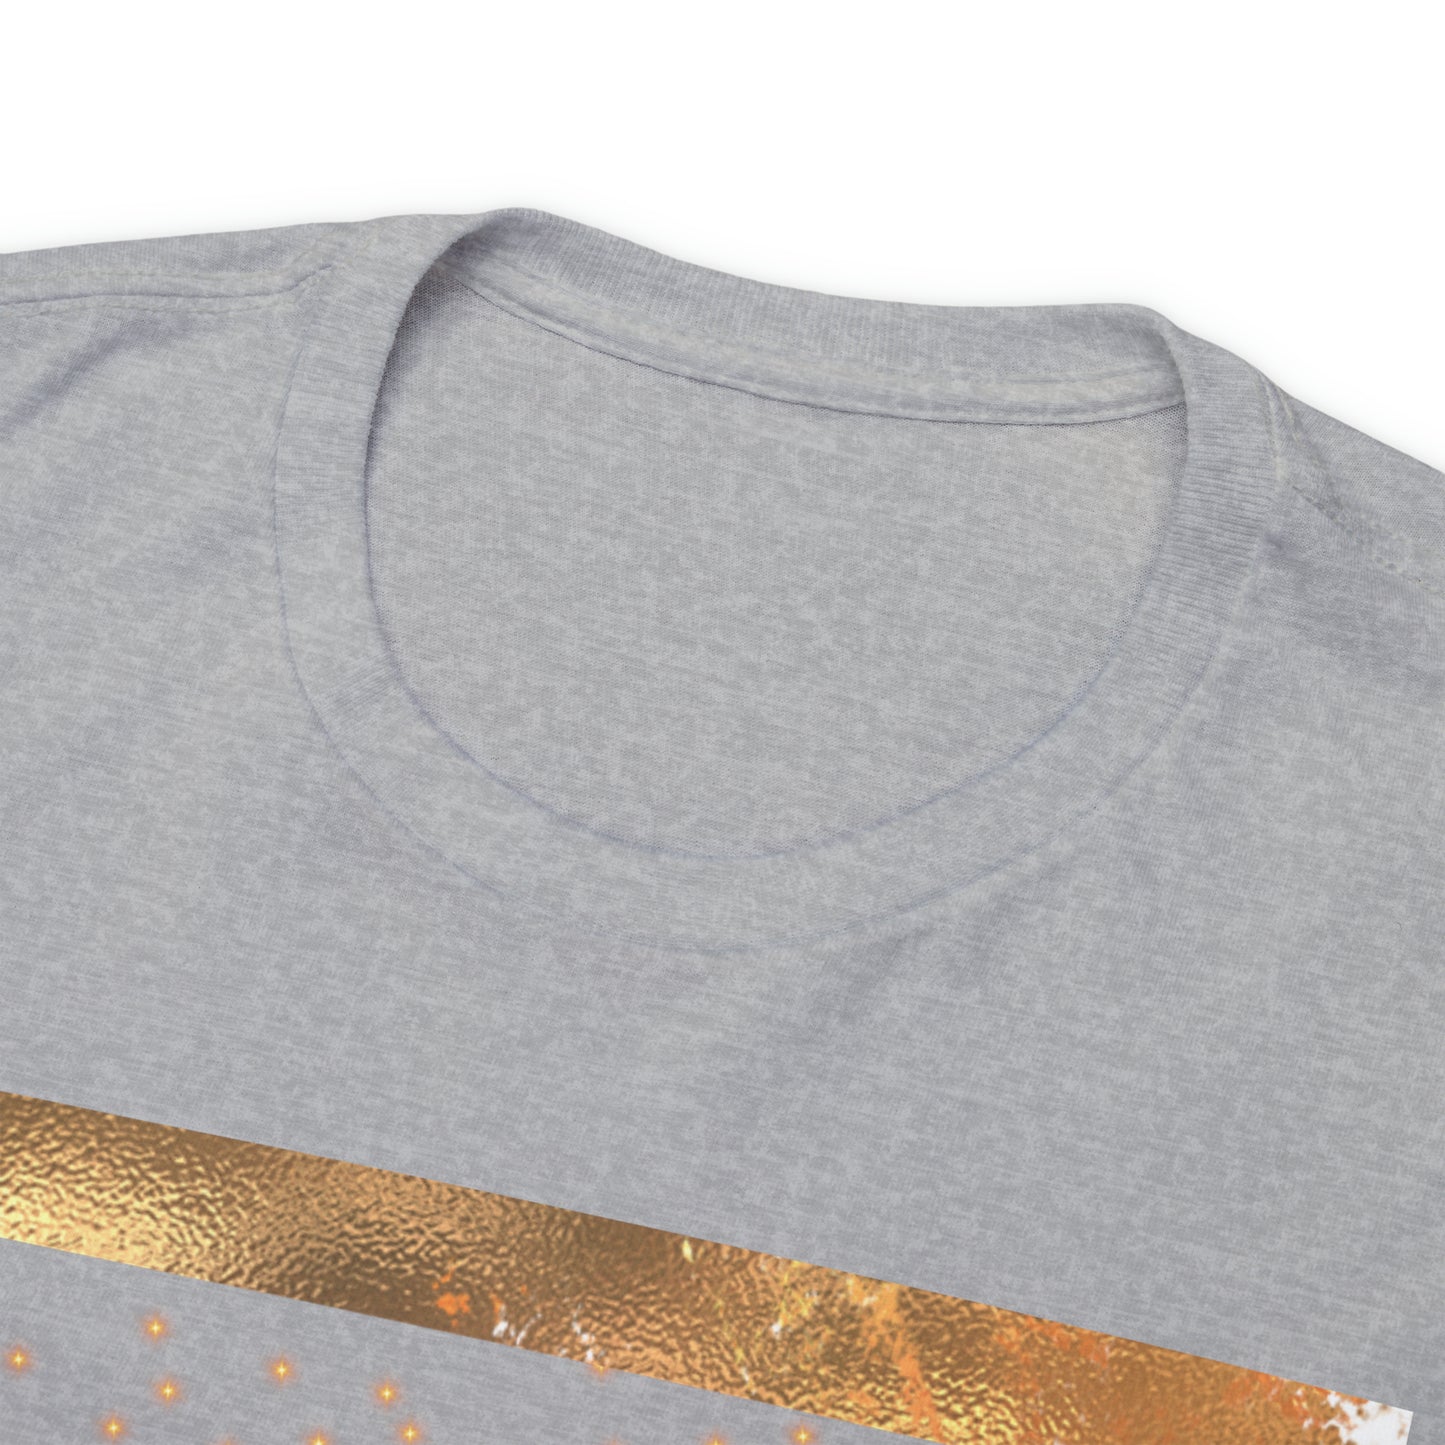 Heavy Cotton Tee 100% cotton, Classic fit Varies sizes. "Gold Collection:.